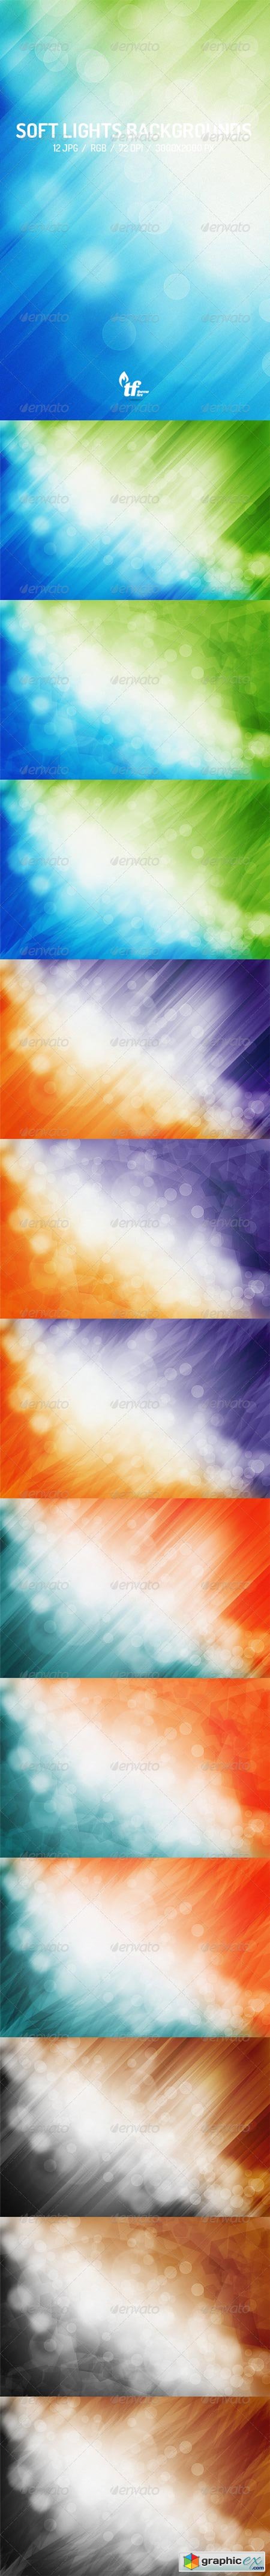 Soft Lights Abstract Backgrounds 7715186